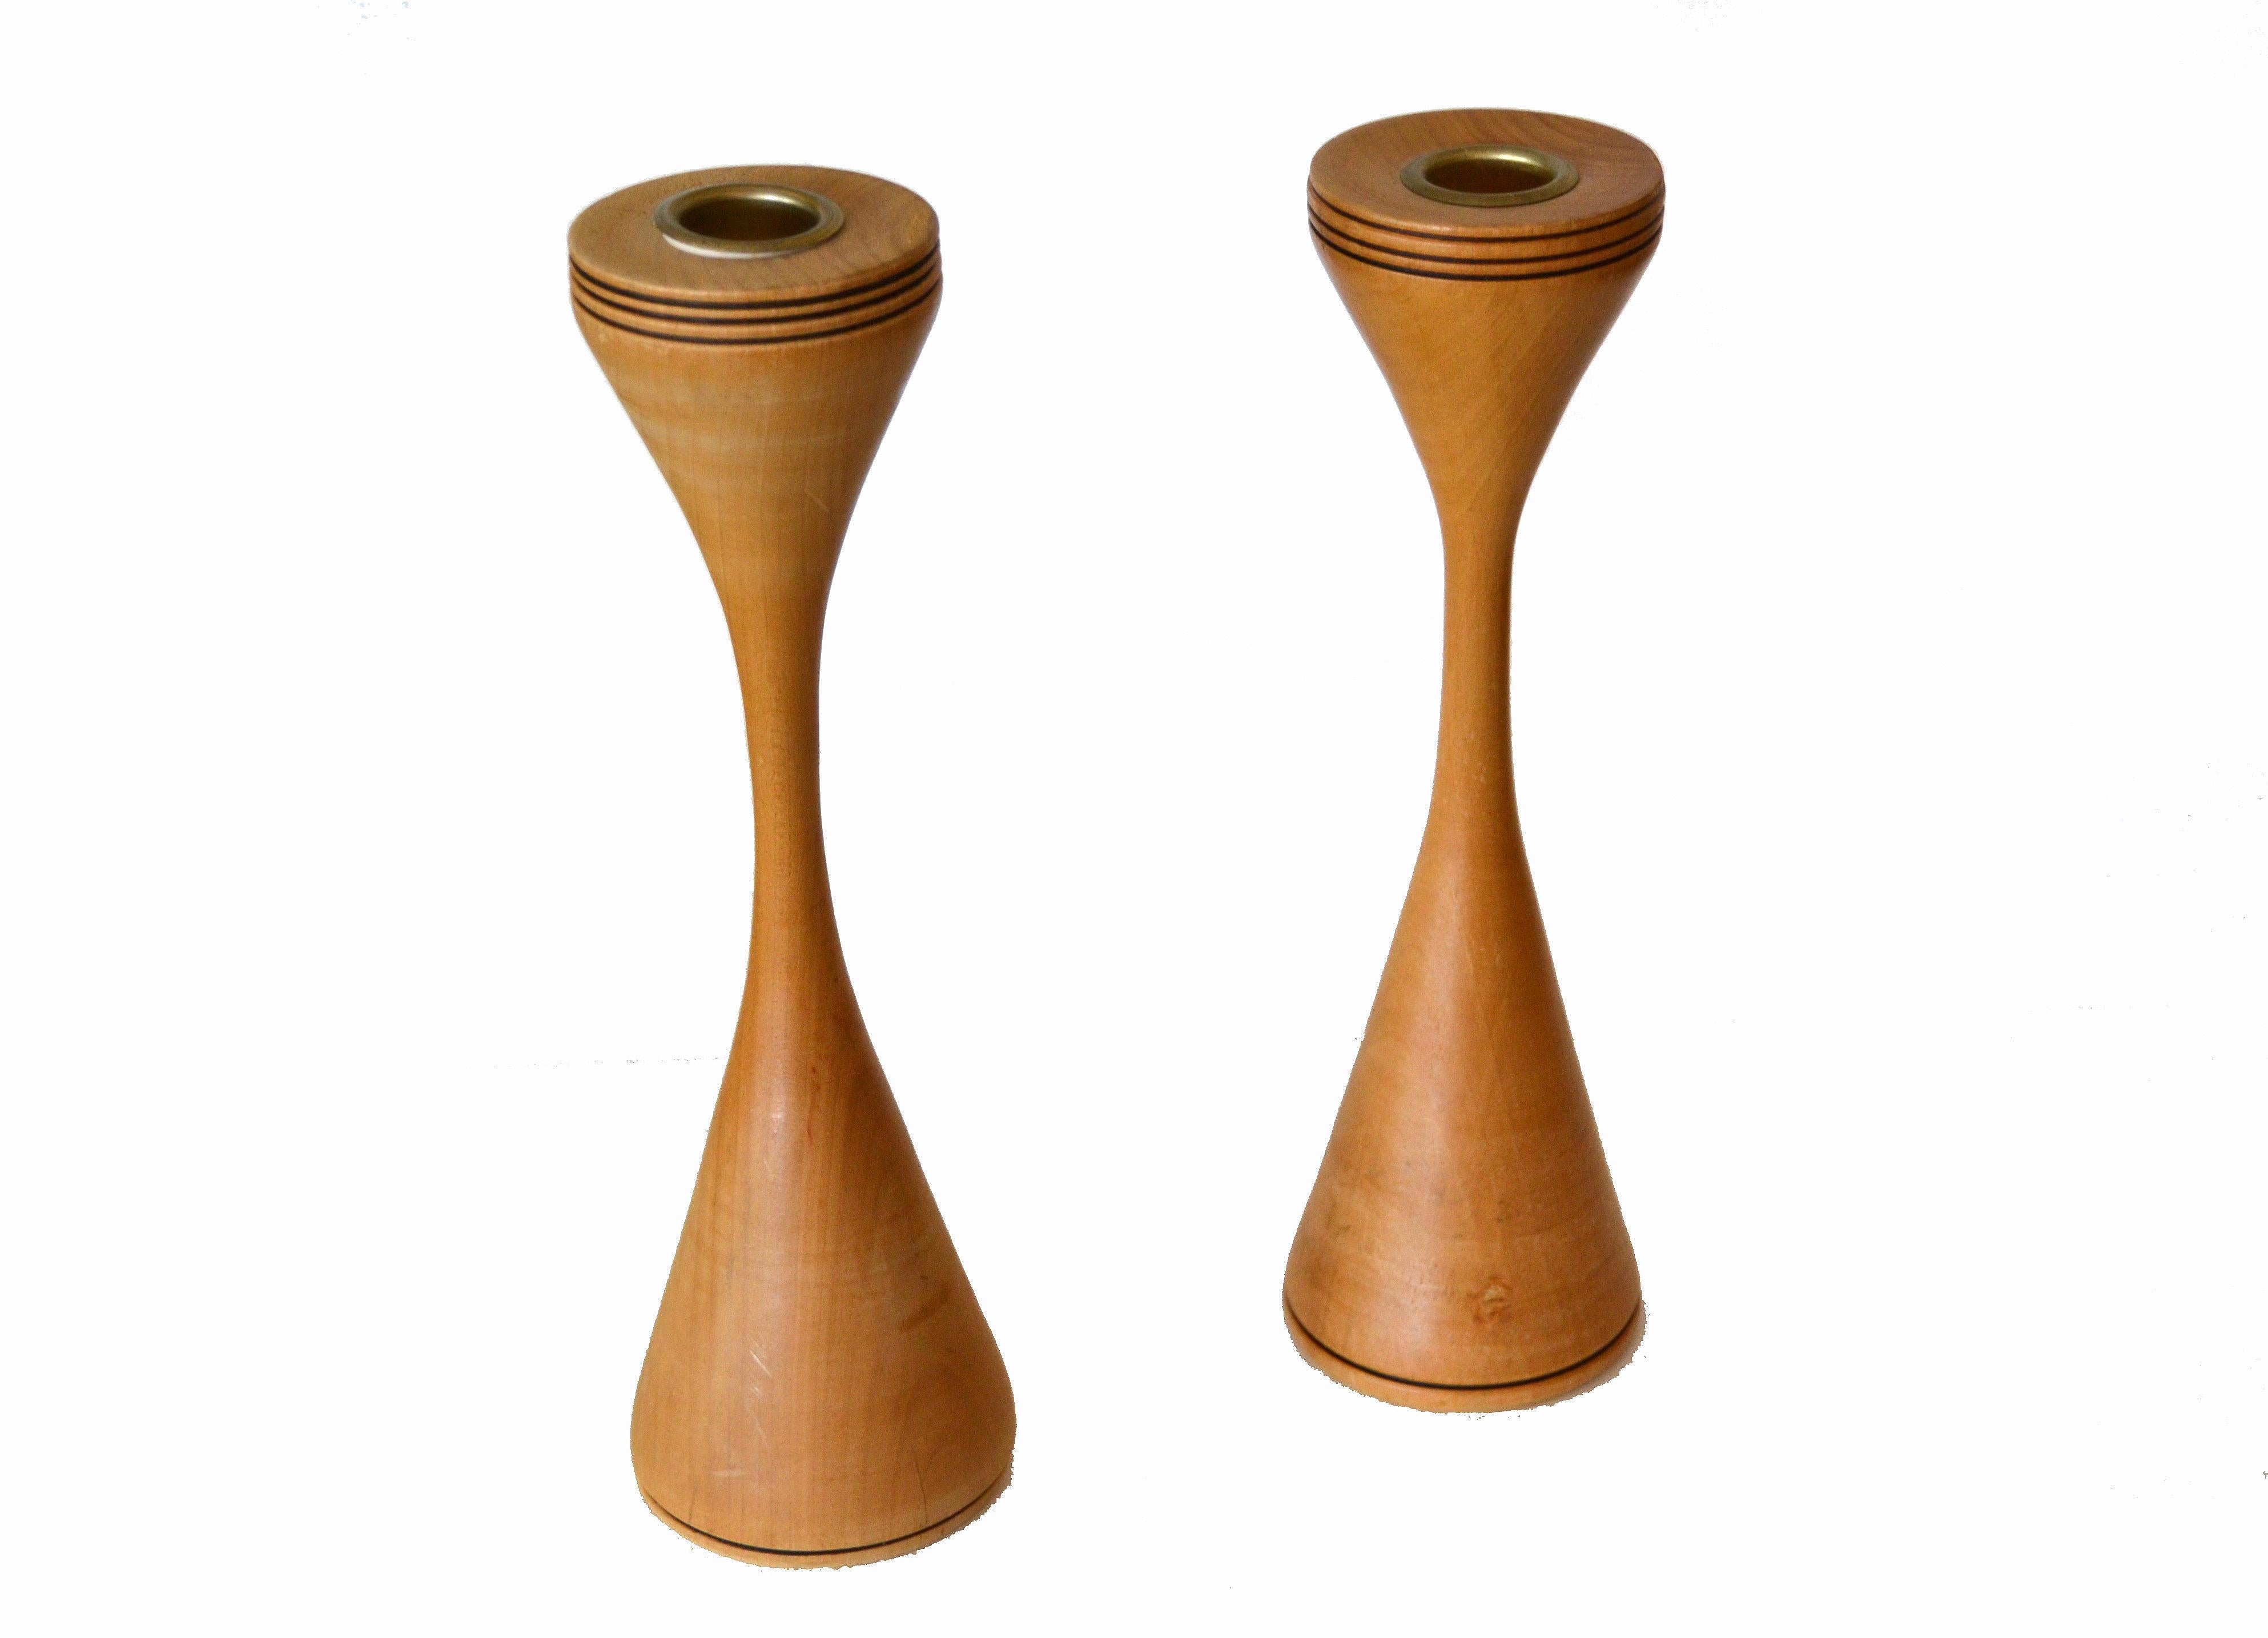 20th Century Signed Scandinavian Modern Handcrafted Turned Wood and Brass Candleholders, Pair For Sale